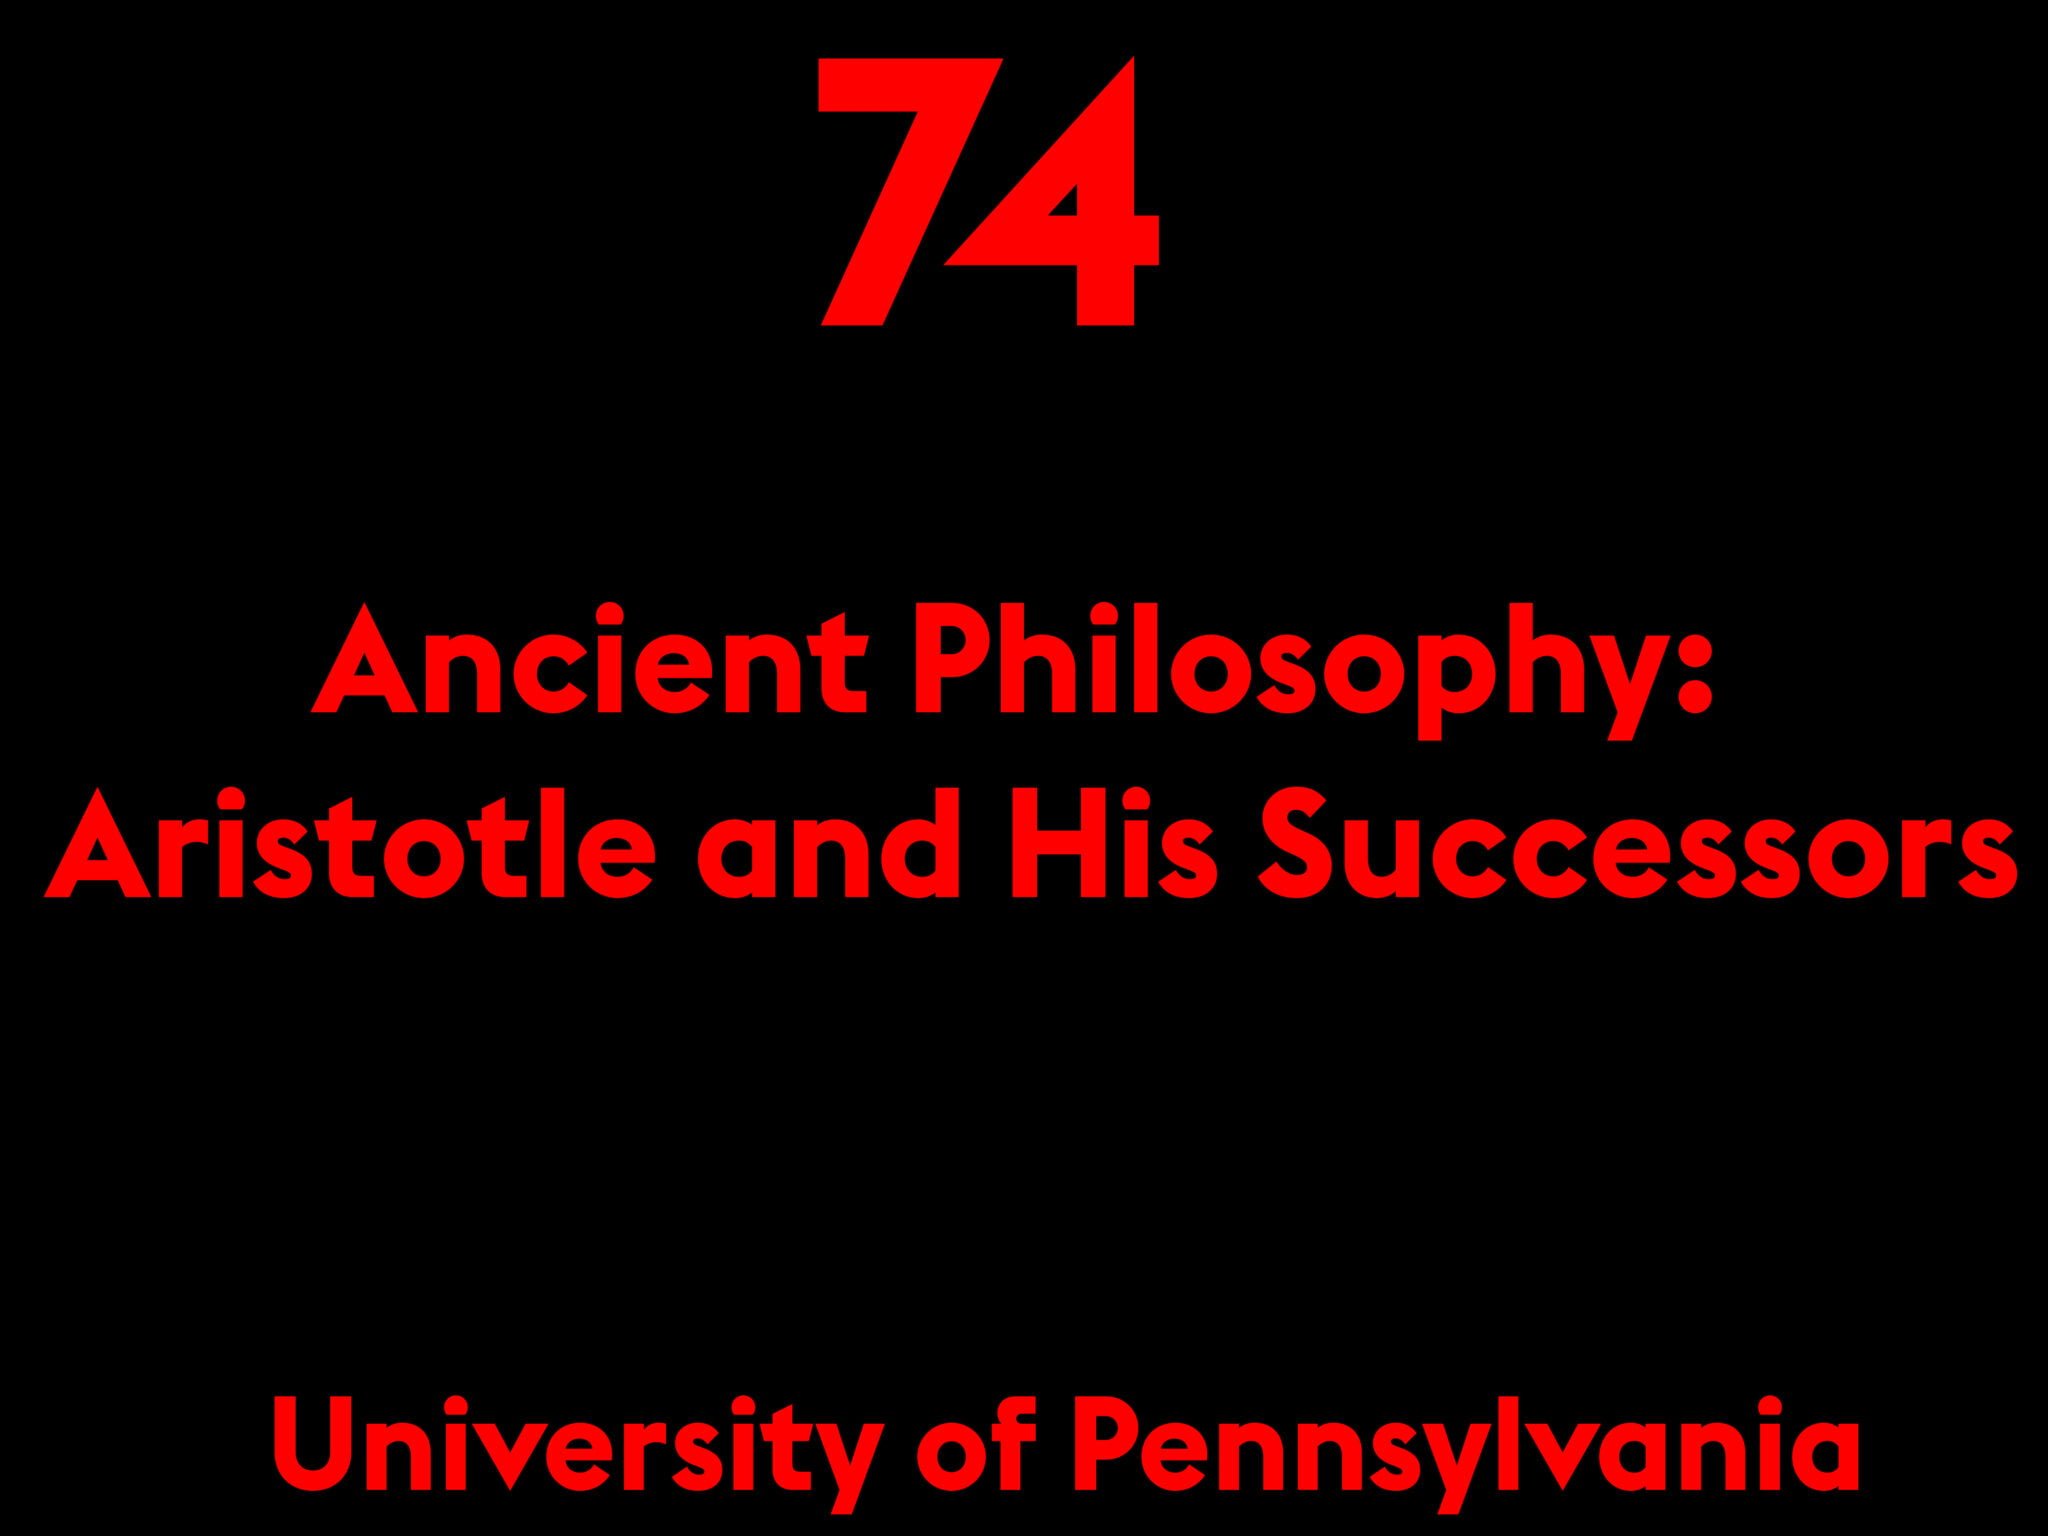 Ancient Philosophy: Aristotle and His Successors